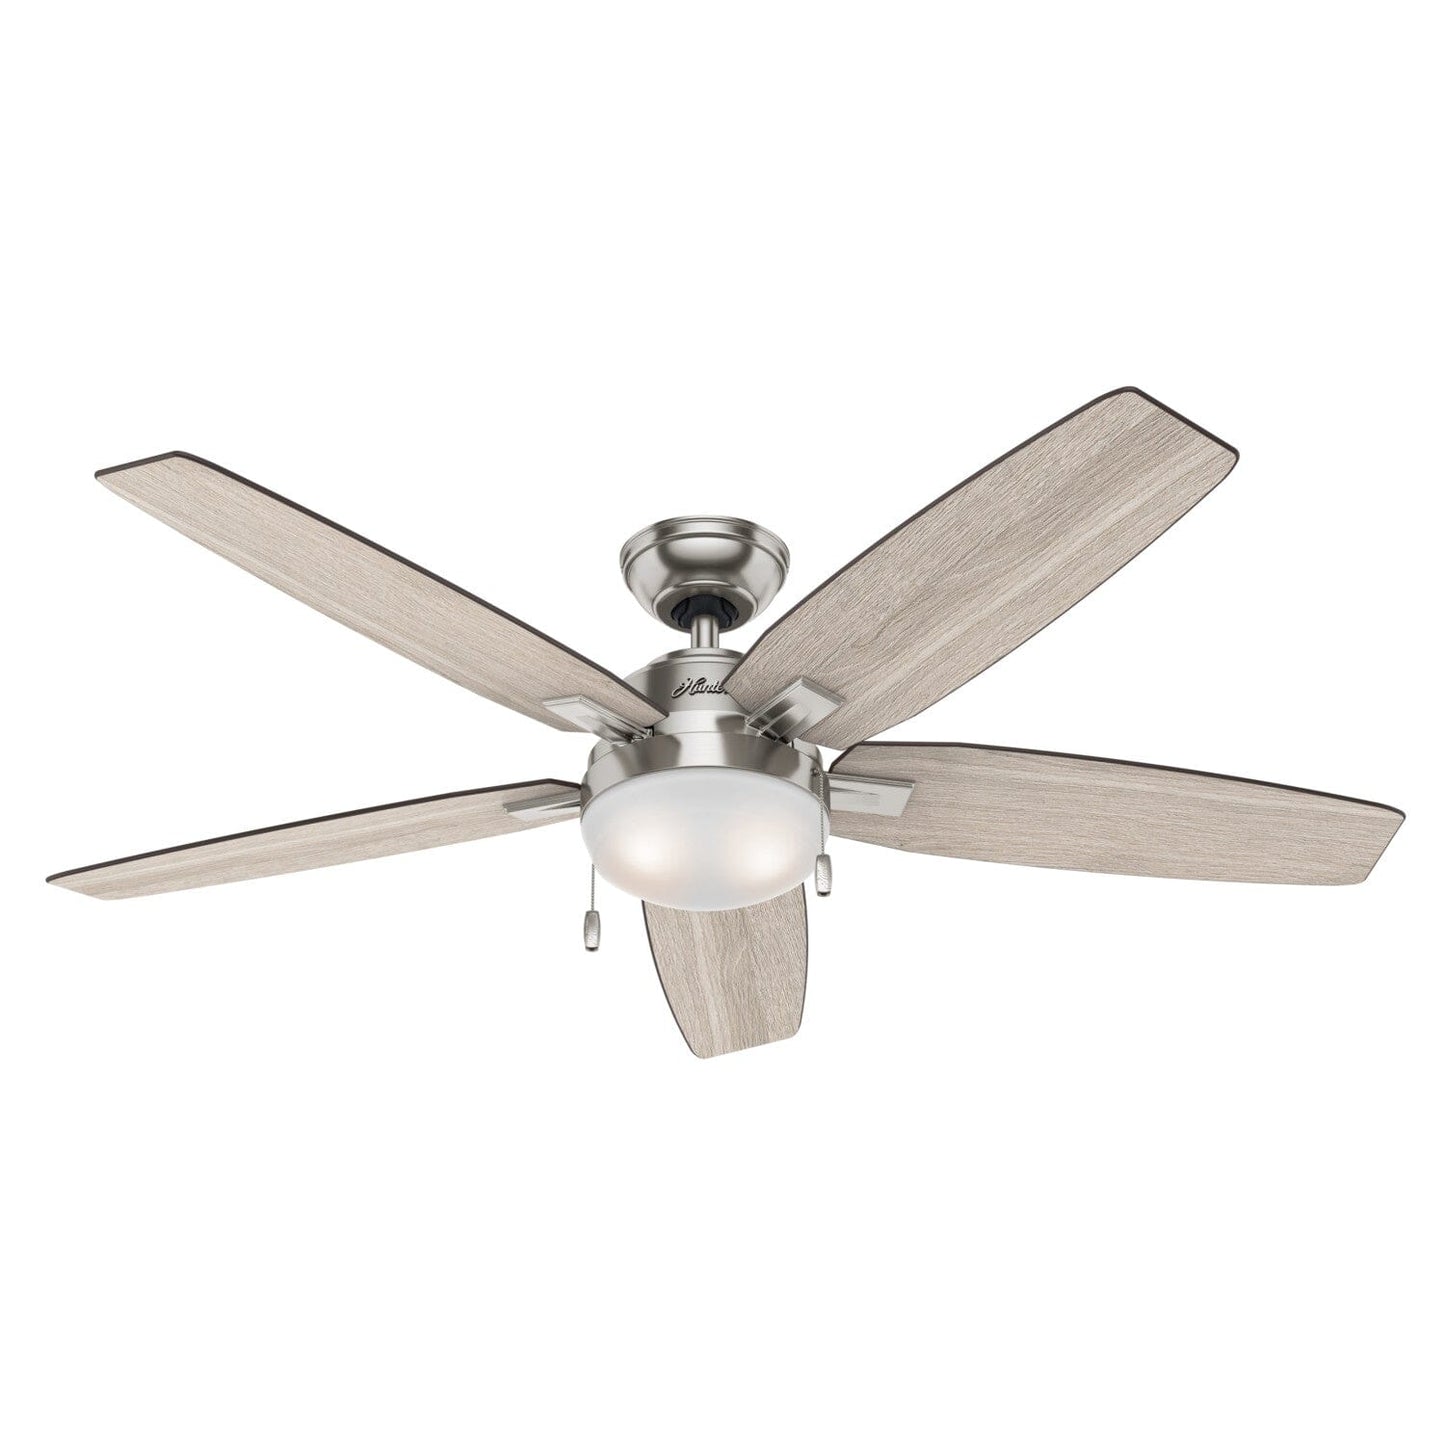 Antero with LED Light 54 inch Ceiling Fans Hunter Brushed Nickel - Burnt Walnut 